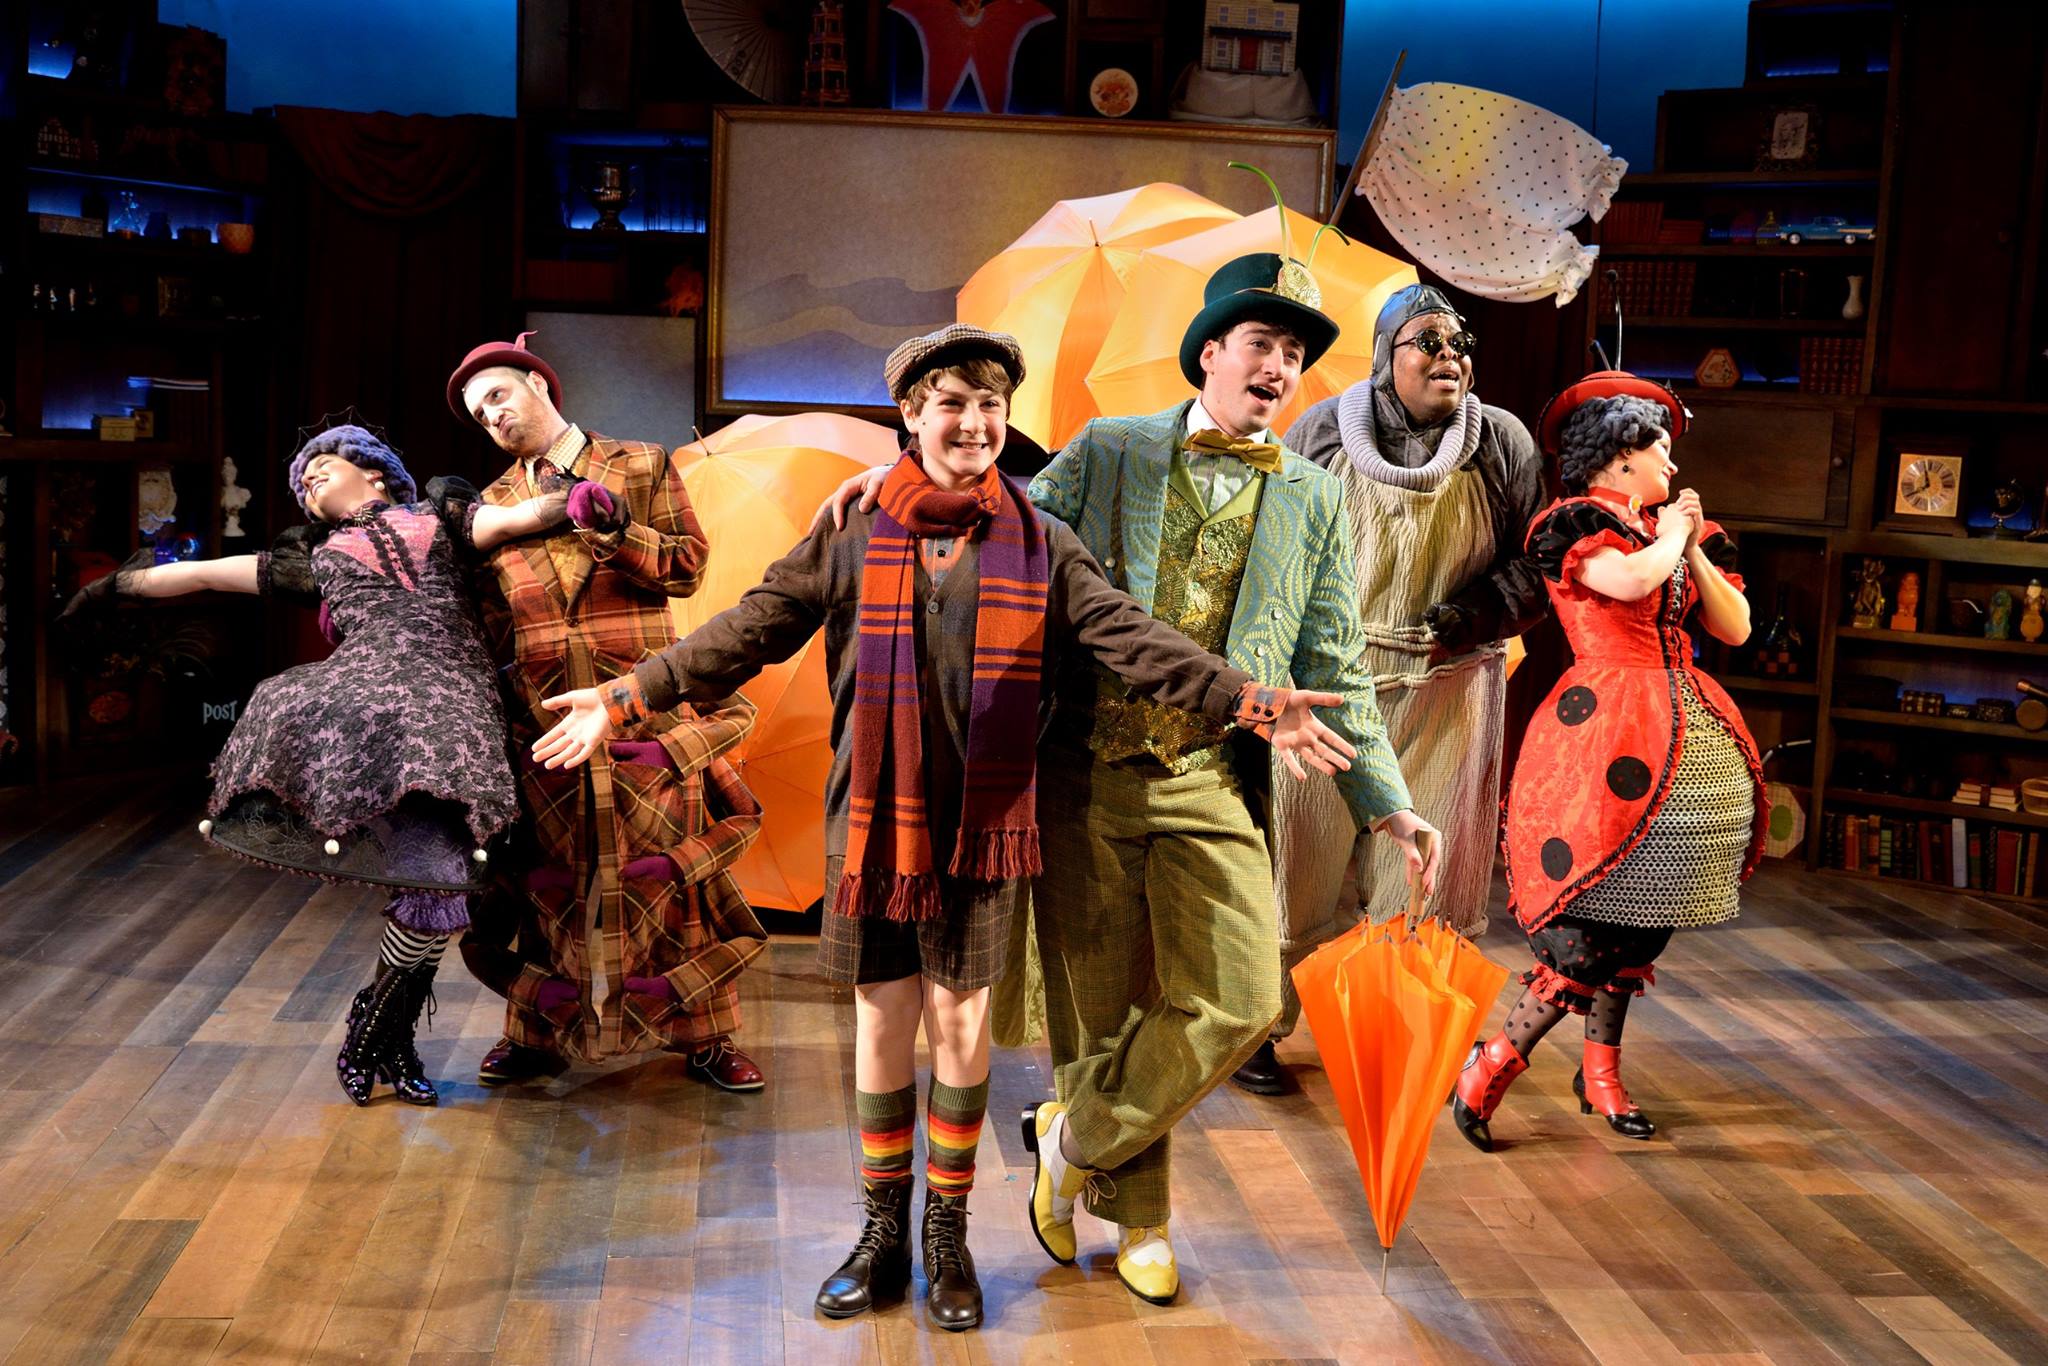  Floatin' Along in James and the Giant Peach at Adventure Theatre MTC.&nbsp;Directed by Michael Baron, Costumes by Jeffrey Meek, Scenic Design by Katie Sullivan 